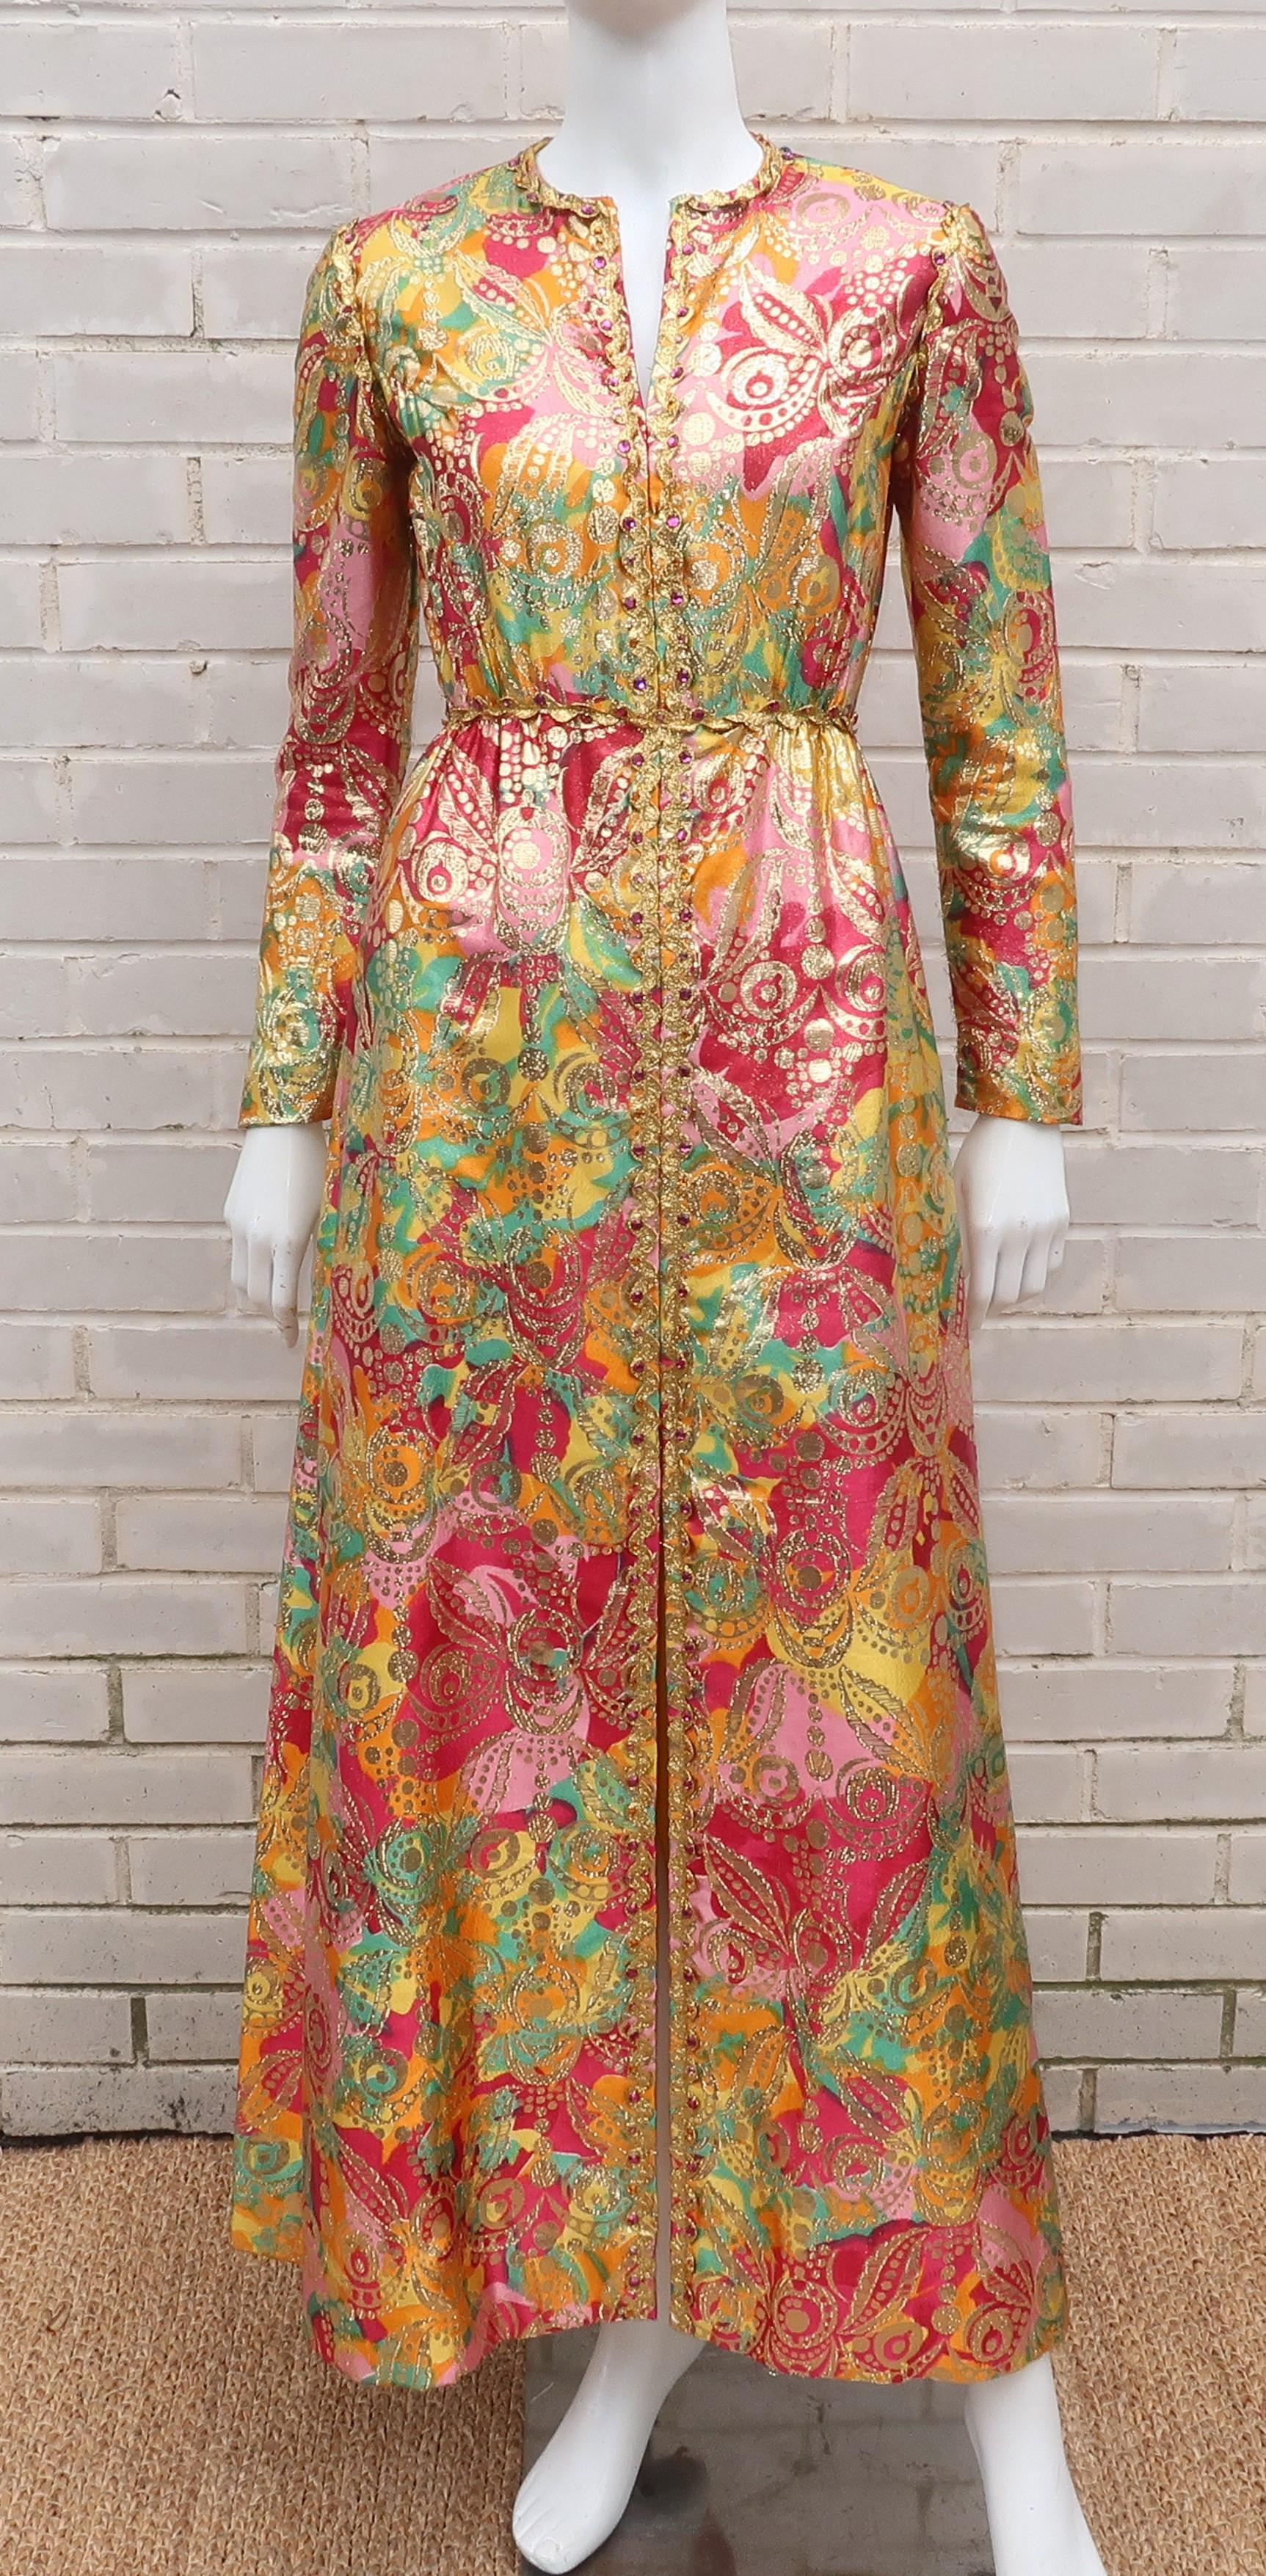 A somewhat simple silhouette is transformed to a dazzling evening dress by an abstract floral gold lamé fabric that gives a nod to 1960's period perfect psychedelia.  This Saks Fifth Avenue design zips and hooks at the back with gold rickrack trim